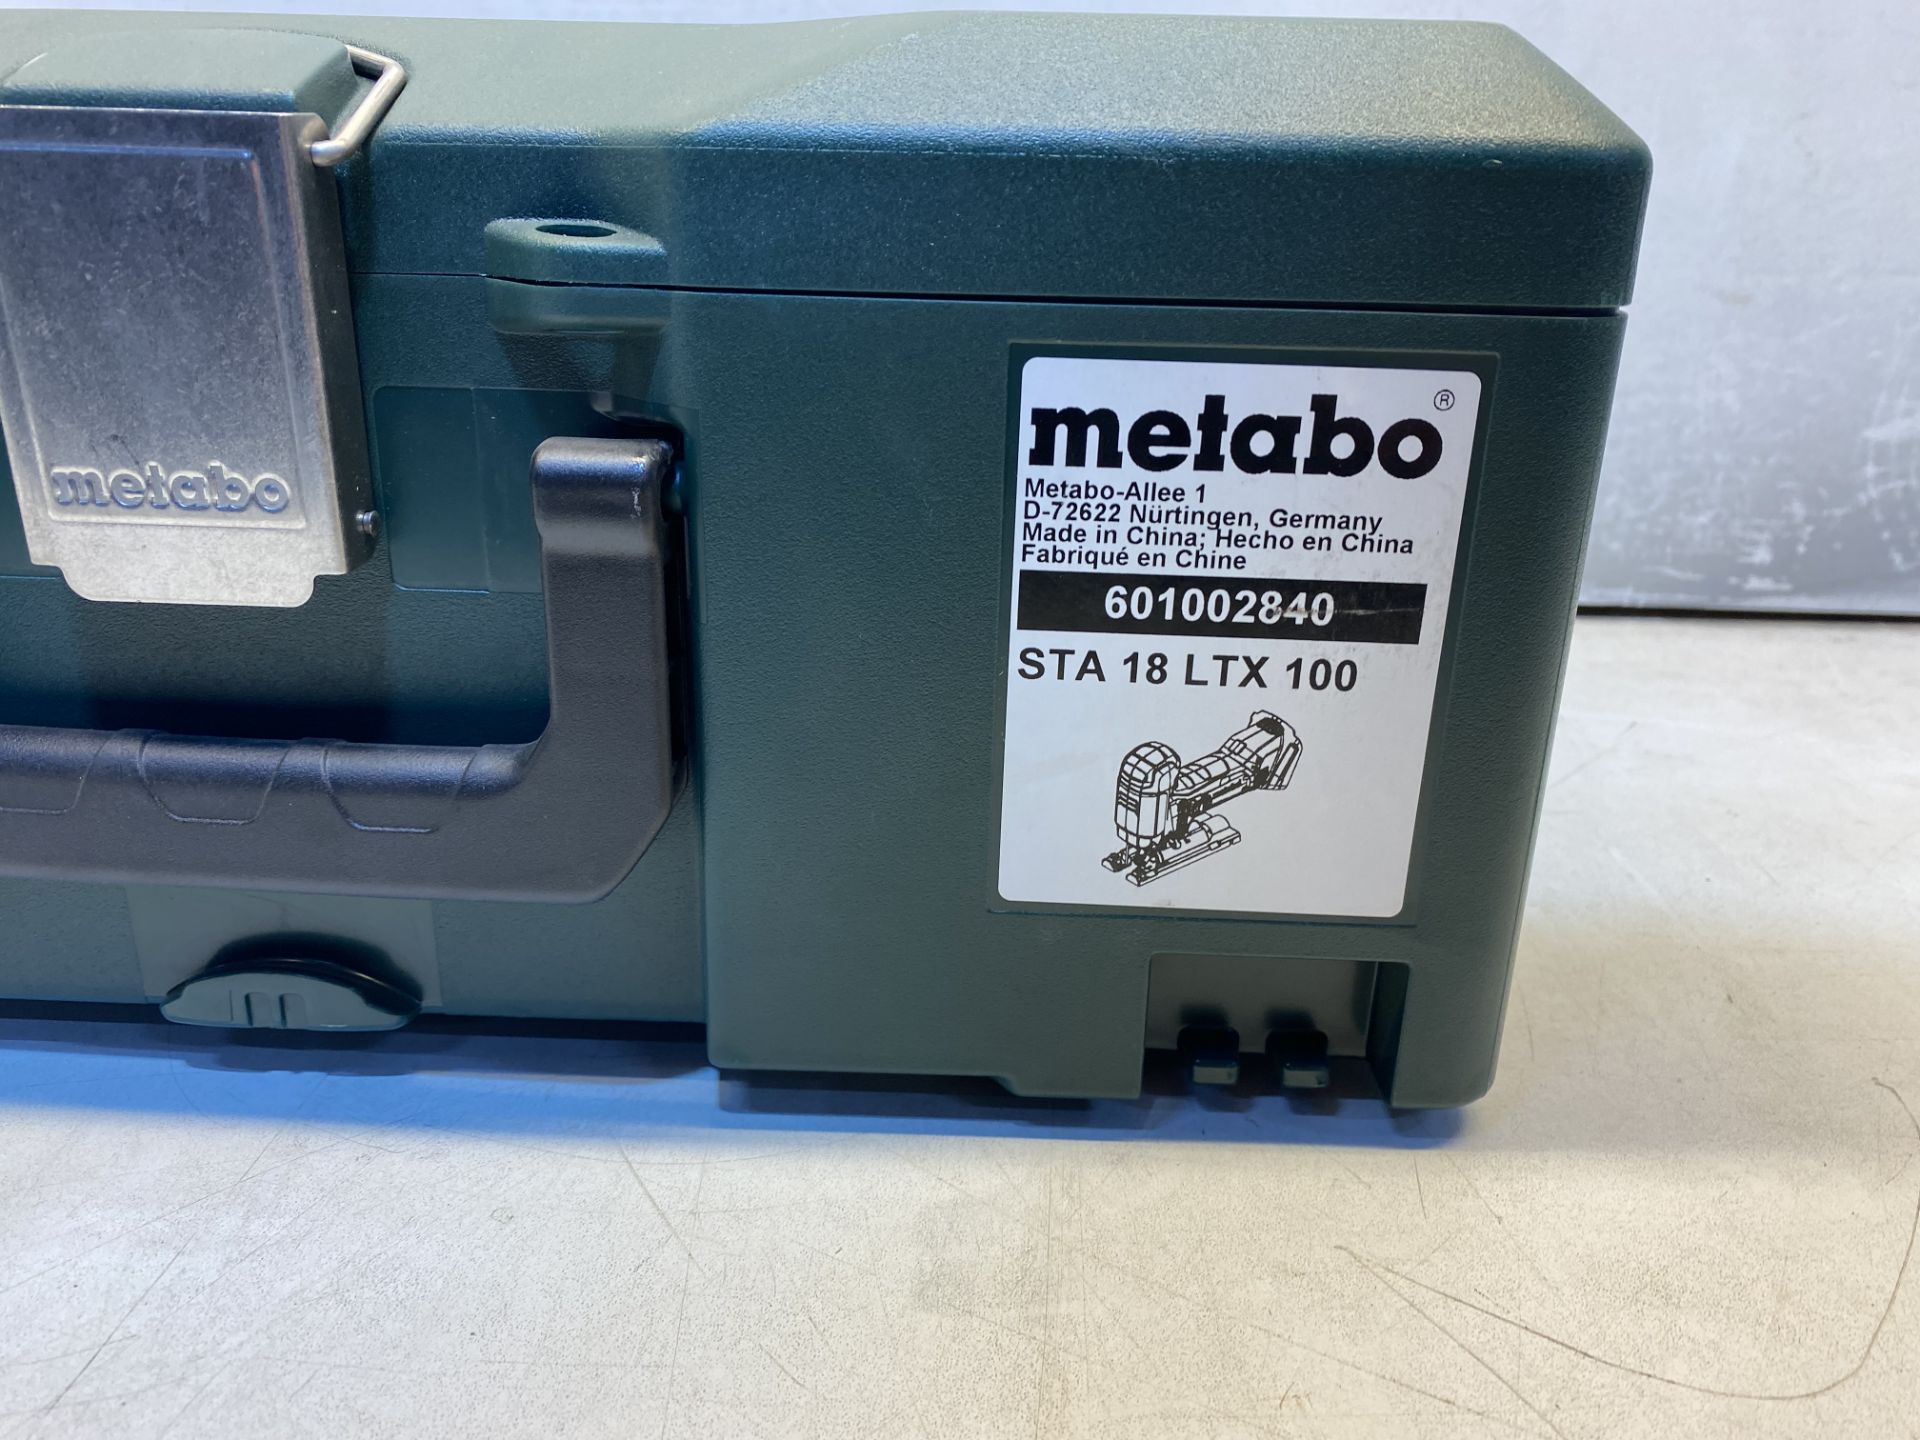 Carry Case For Metabo STA18LTX100 Body Grip Jigsaw ( Jigsaw Not Included ) - Image 2 of 4